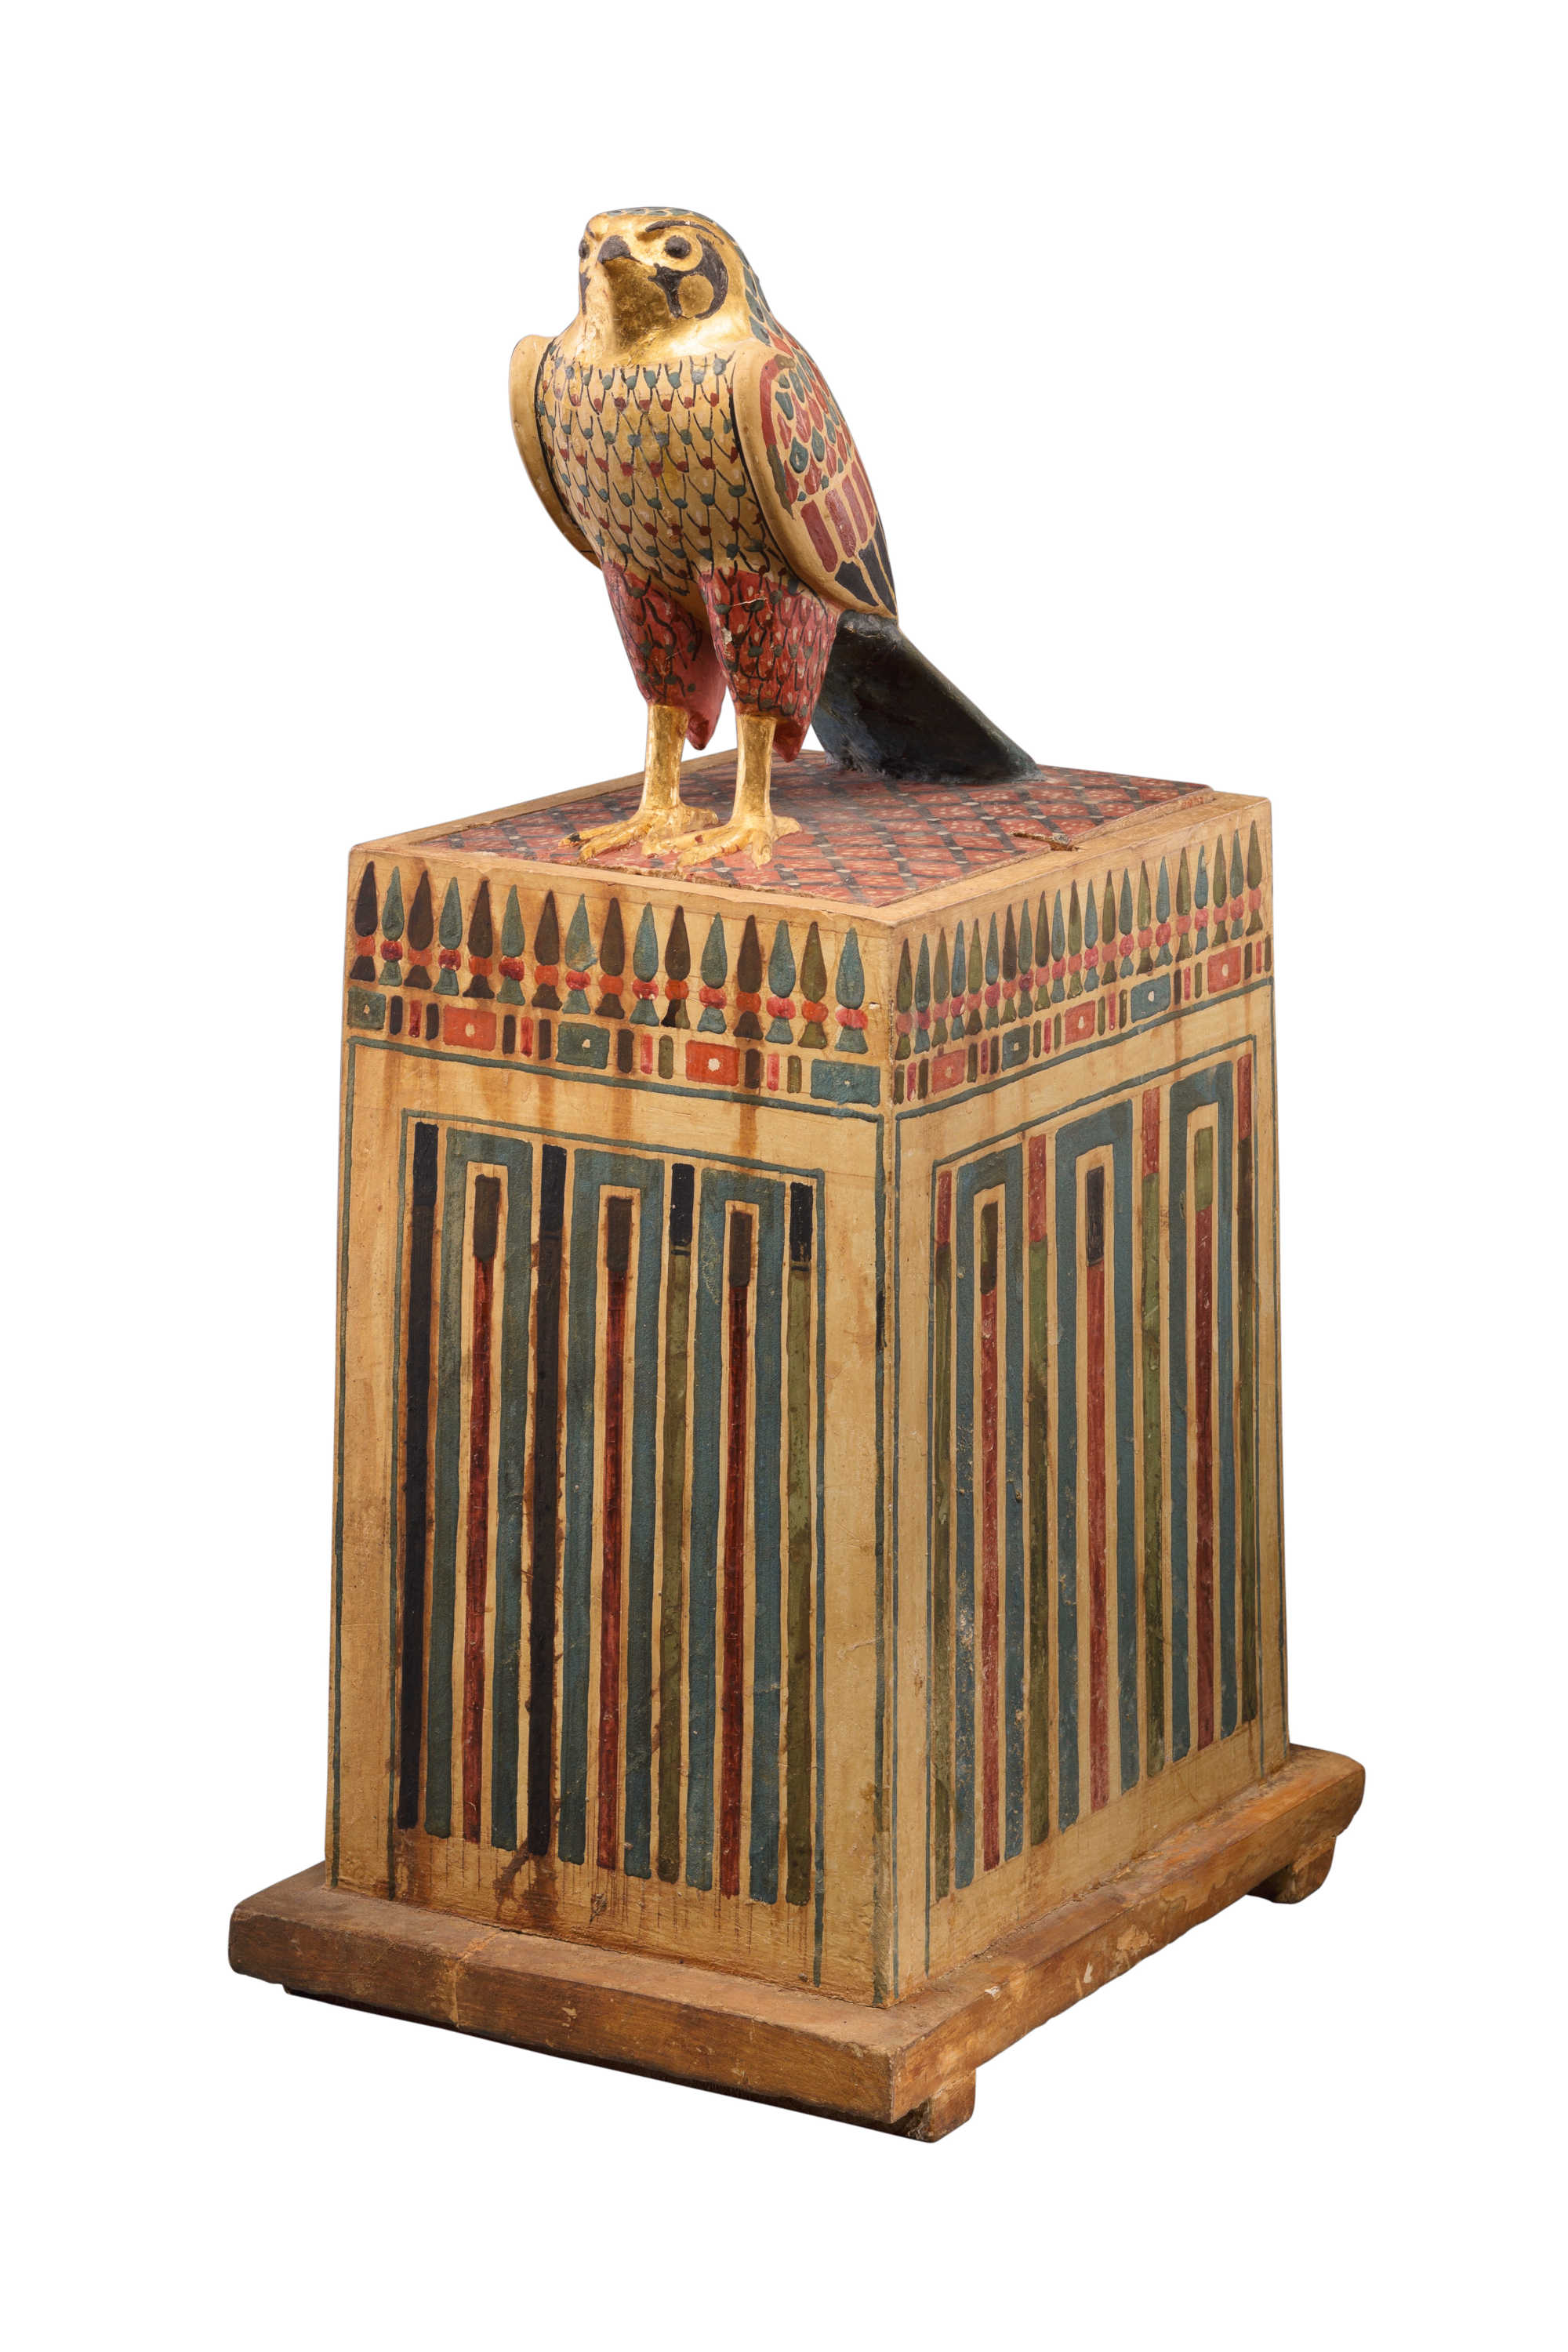 Falcon box with wrapped feathers, 332–30 BC. Painted and gilded wood, linen, resin and feathers, 58.5 × 24.9 × 33.3 cm / 23 × 9 ¾ × 13 in, Metropolitan Museum of Art, New York.